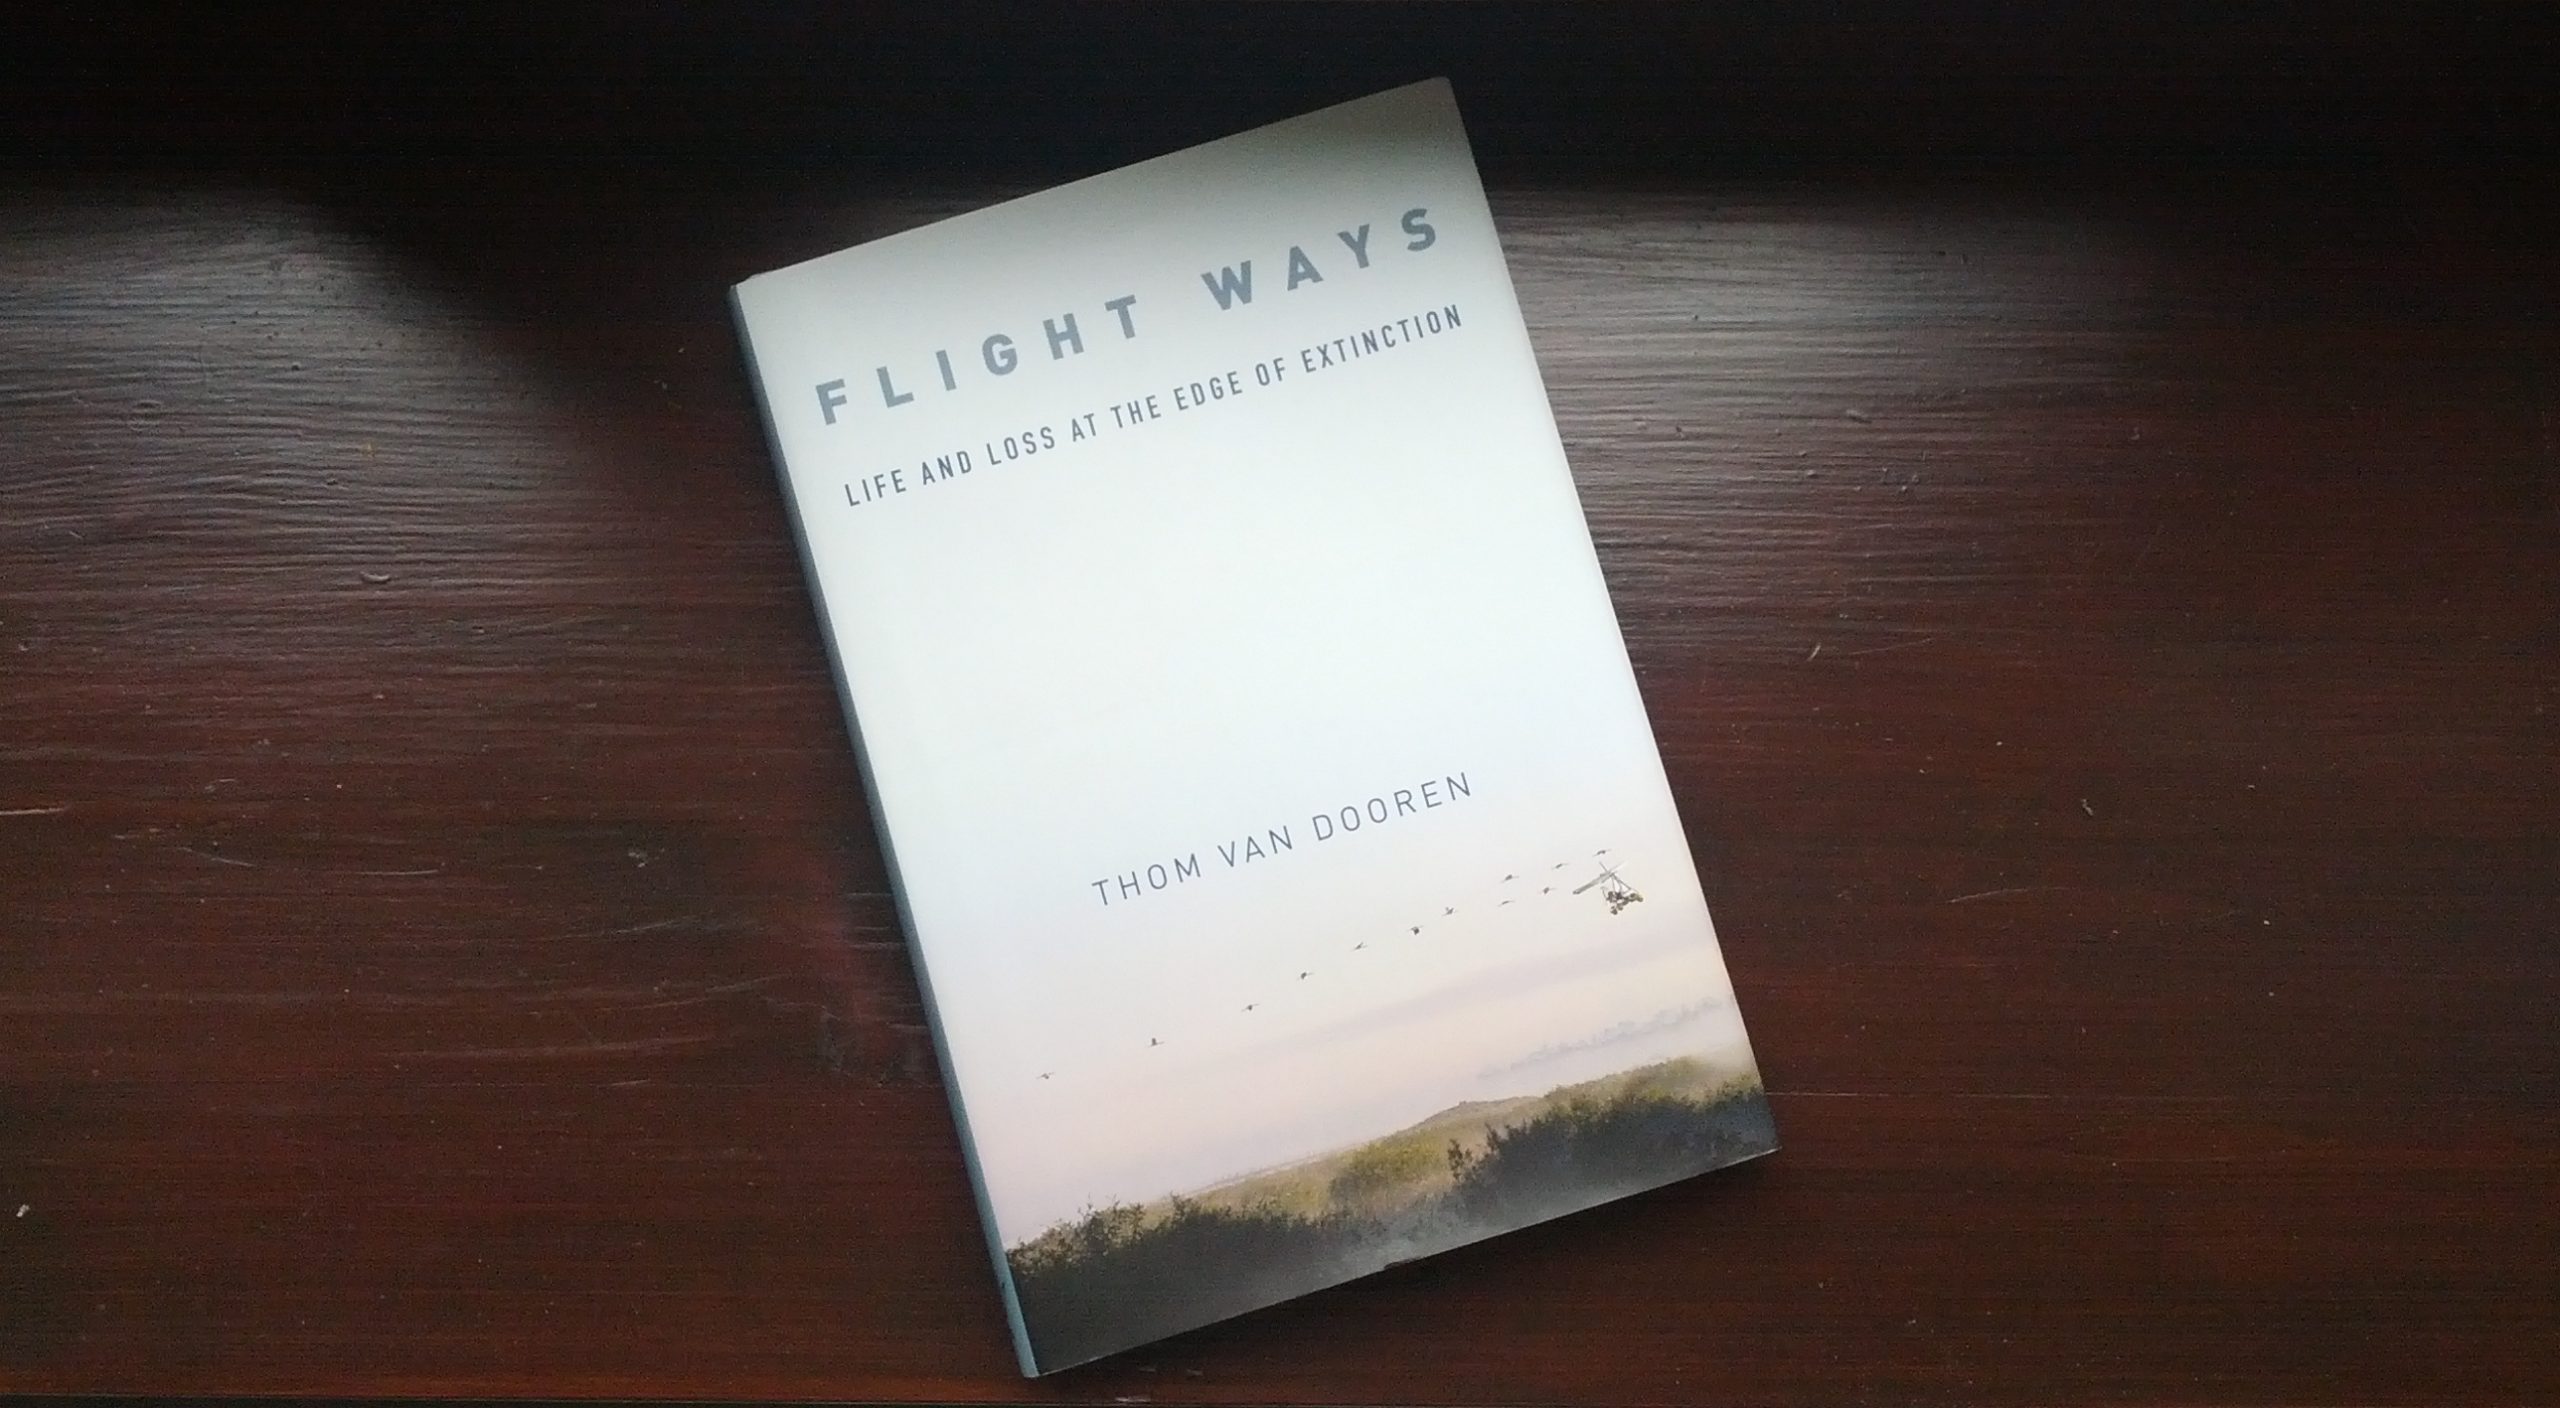 Flight Ways: Life and Loss at the Edge of Extinction